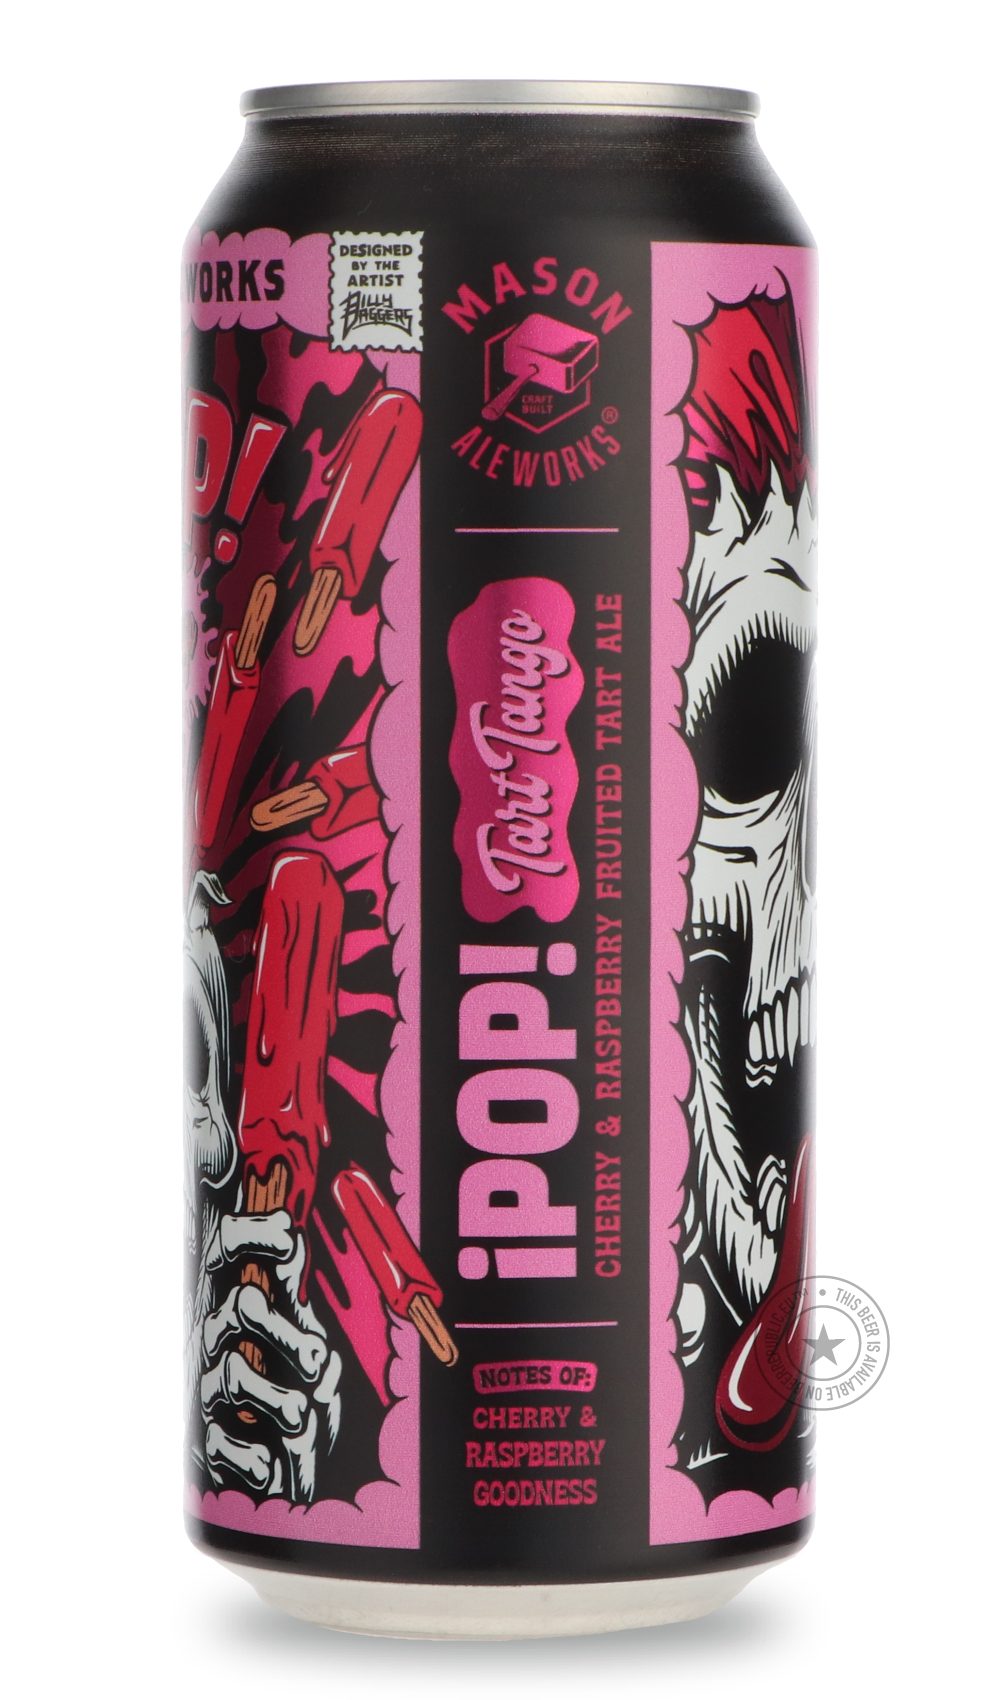 -Mason Ale Works- IPOP! Tart Tango-Sour / Wild & Fruity- Only @ Beer Republic - The best online beer store for American & Canadian craft beer - Buy beer online from the USA and Canada - Bier online kopen - Amerikaans bier kopen - Craft beer store - Craft beer kopen - Amerikanisch bier kaufen - Bier online kaufen - Acheter biere online - IPA - Stout - Porter - New England IPA - Hazy IPA - Imperial Stout - Barrel Aged - Barrel Aged Imperial Stout - Brown - Dark beer - Blond - Blonde - Pilsner - Lager - Wheat 